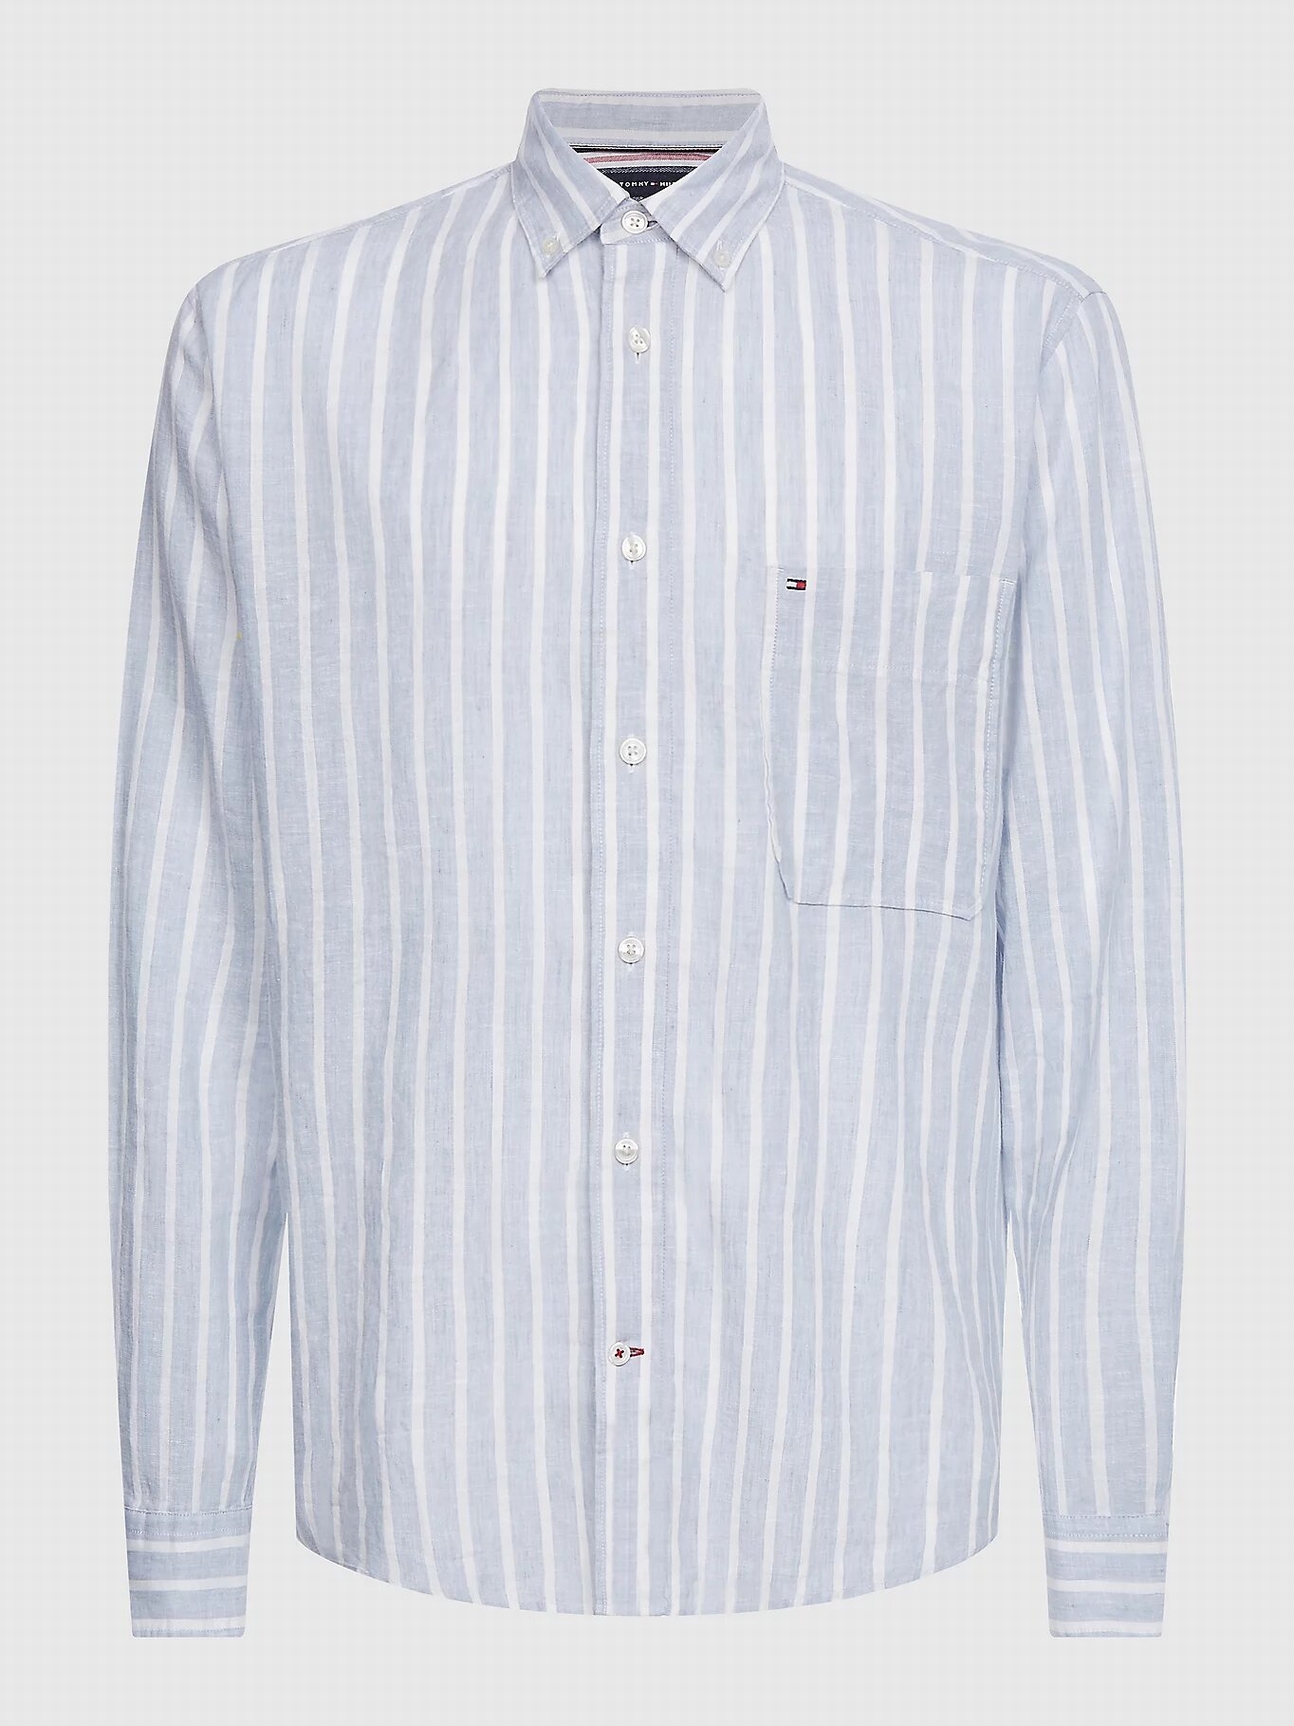 CHEMISE A RAYURE TOMMY HILFIGER